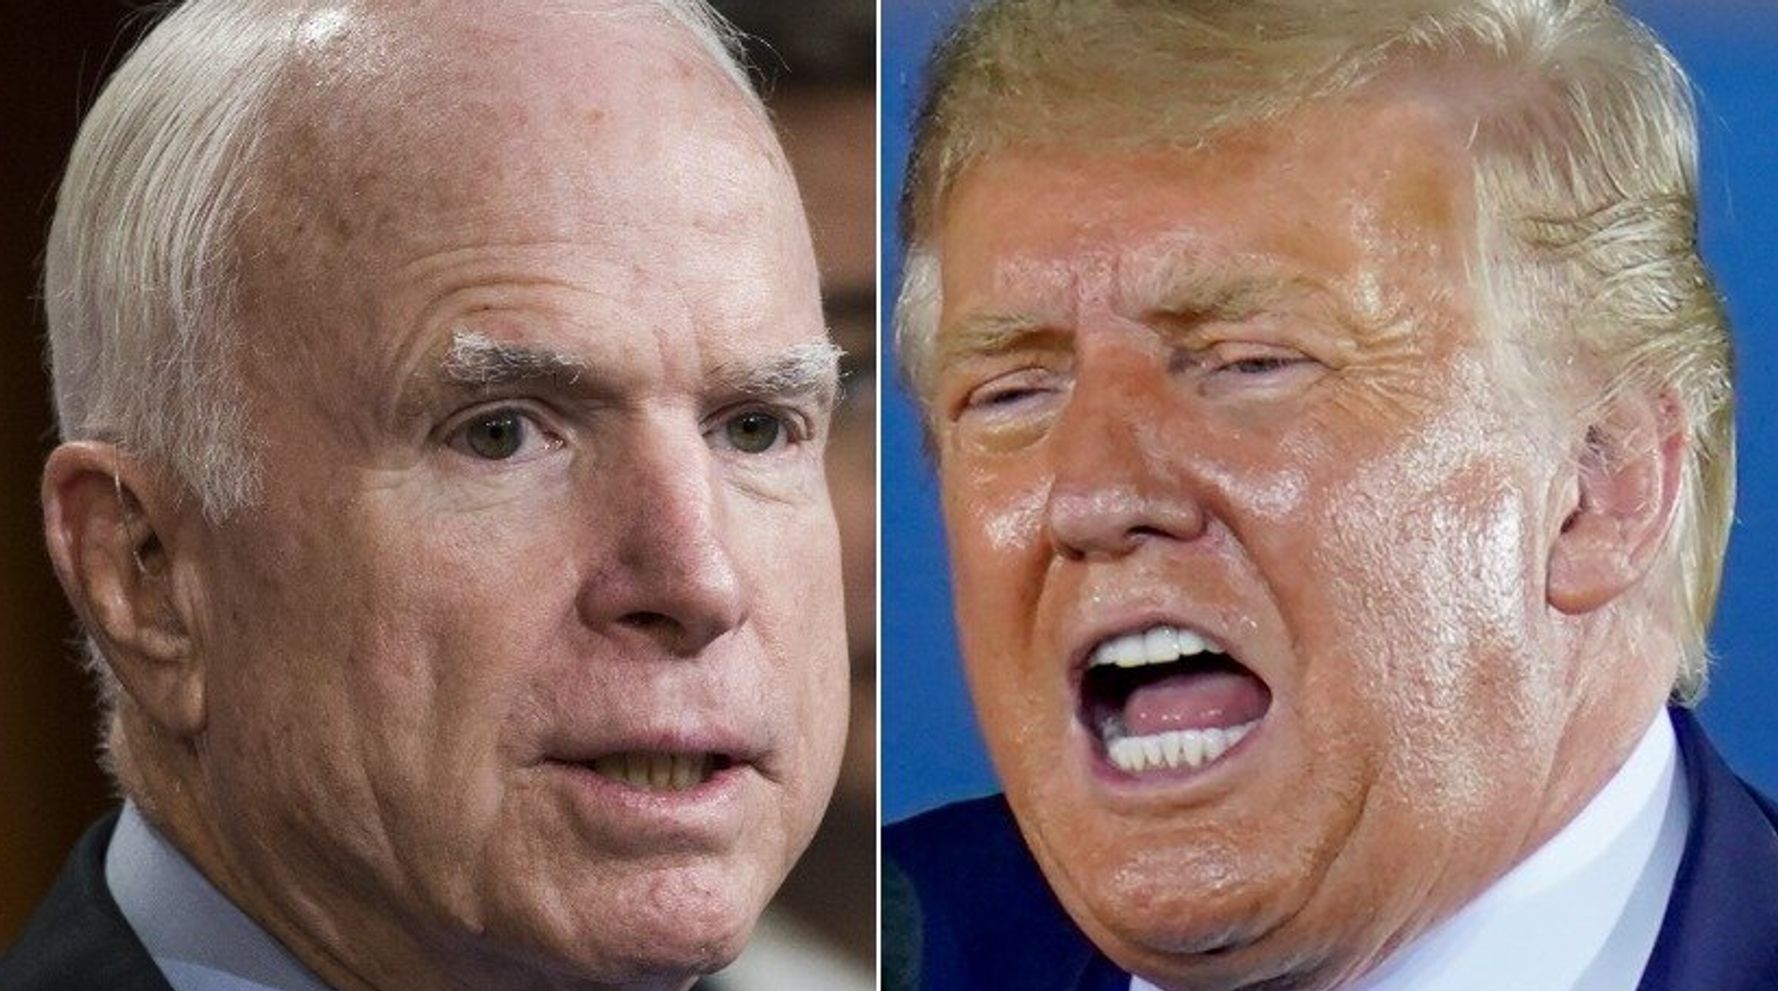 John McCain Had A Scathing Reason For Not Caring About Trump's Insults, Says Former Aide